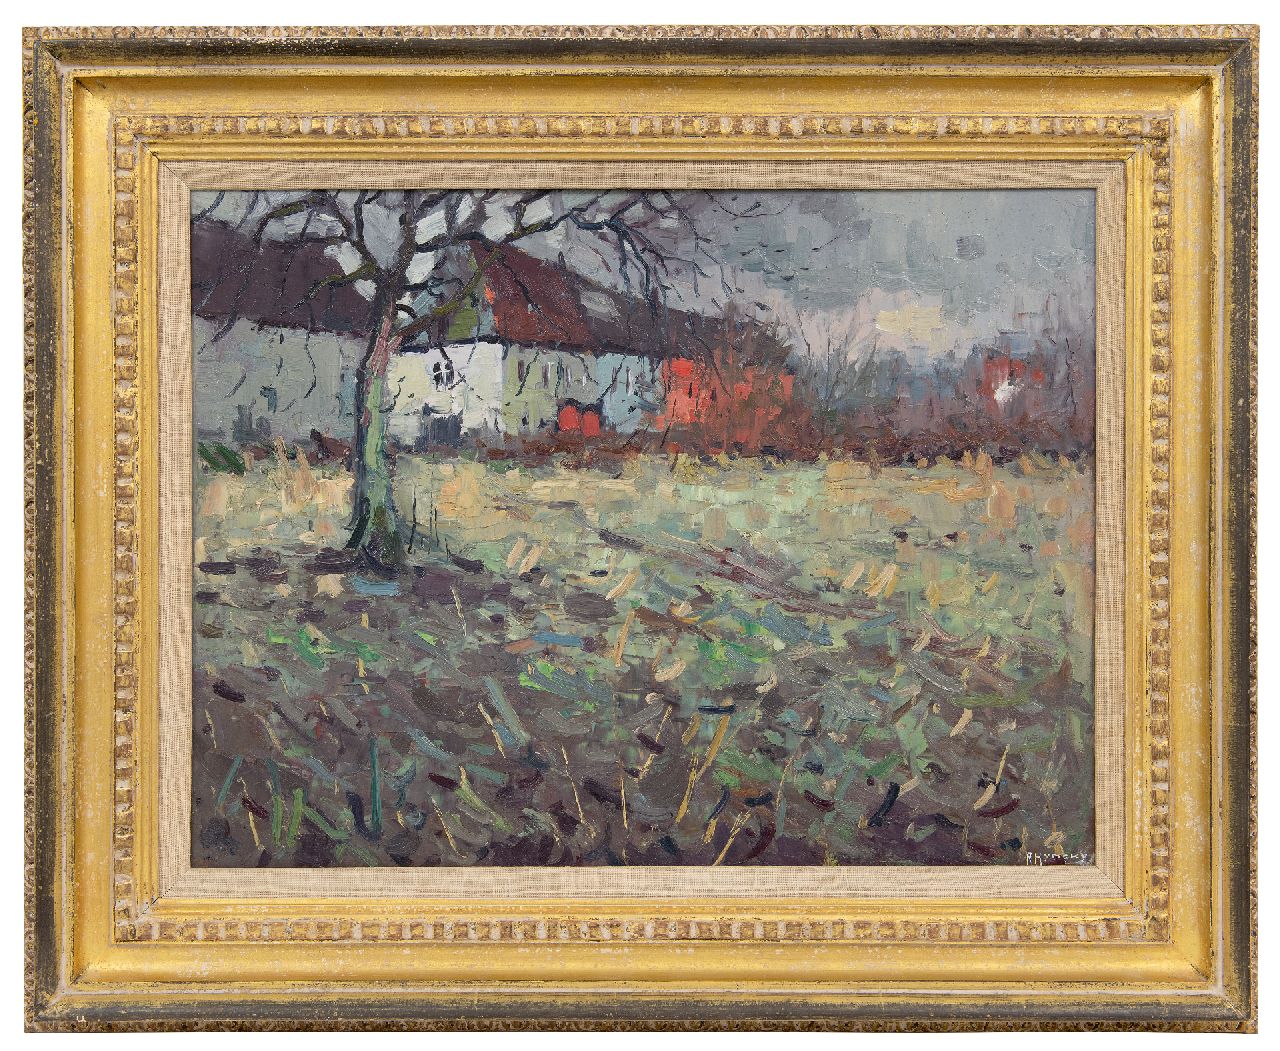 Hynckes R.  | Raoul Hynckes | Paintings offered for sale | Audergem near Brussels, oil on panel 42.1 x 55.8 cm, signed l.r.